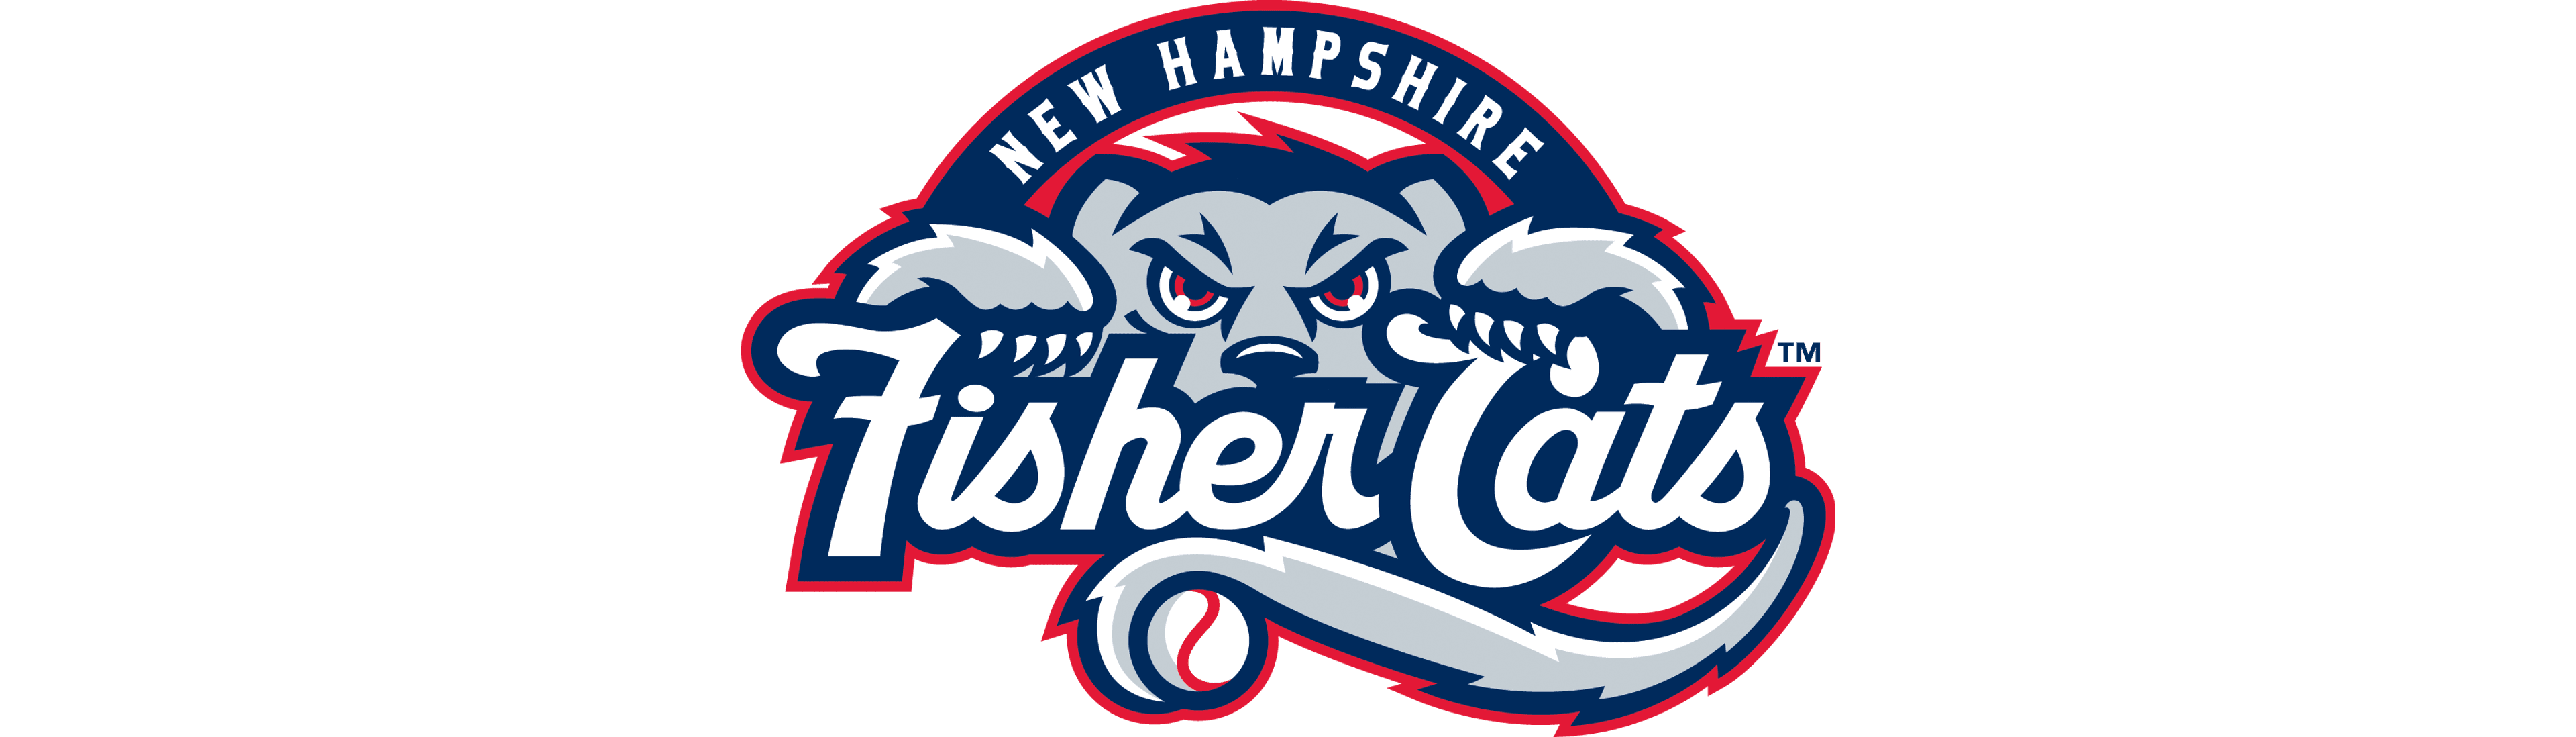 Fisher Cats Vs. Rumble Ponies 4/23 - 4/25 logo image